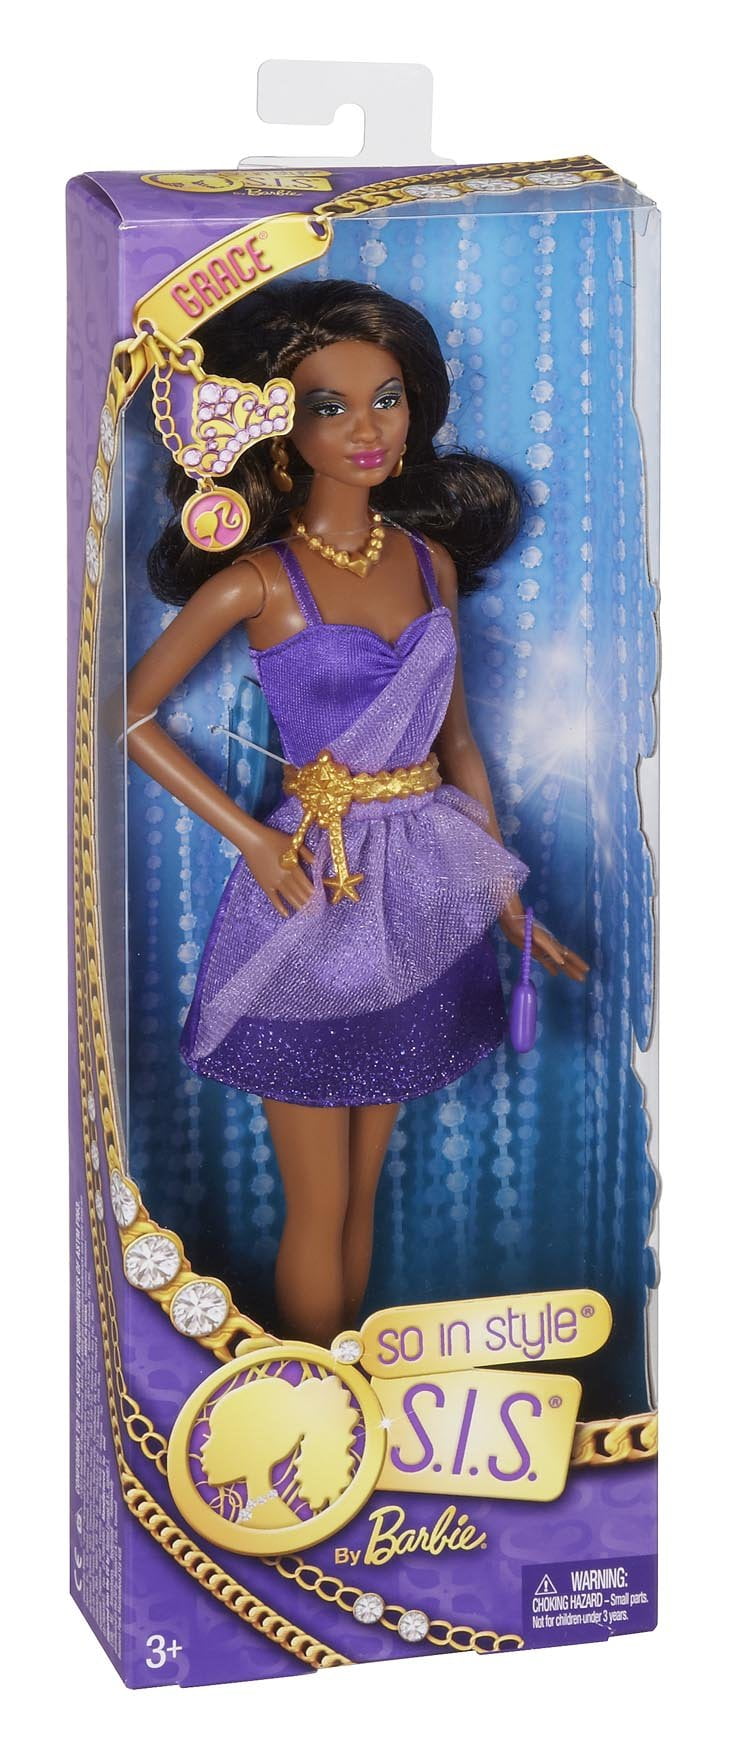 Barbie So in Style Grace Fashion Doll